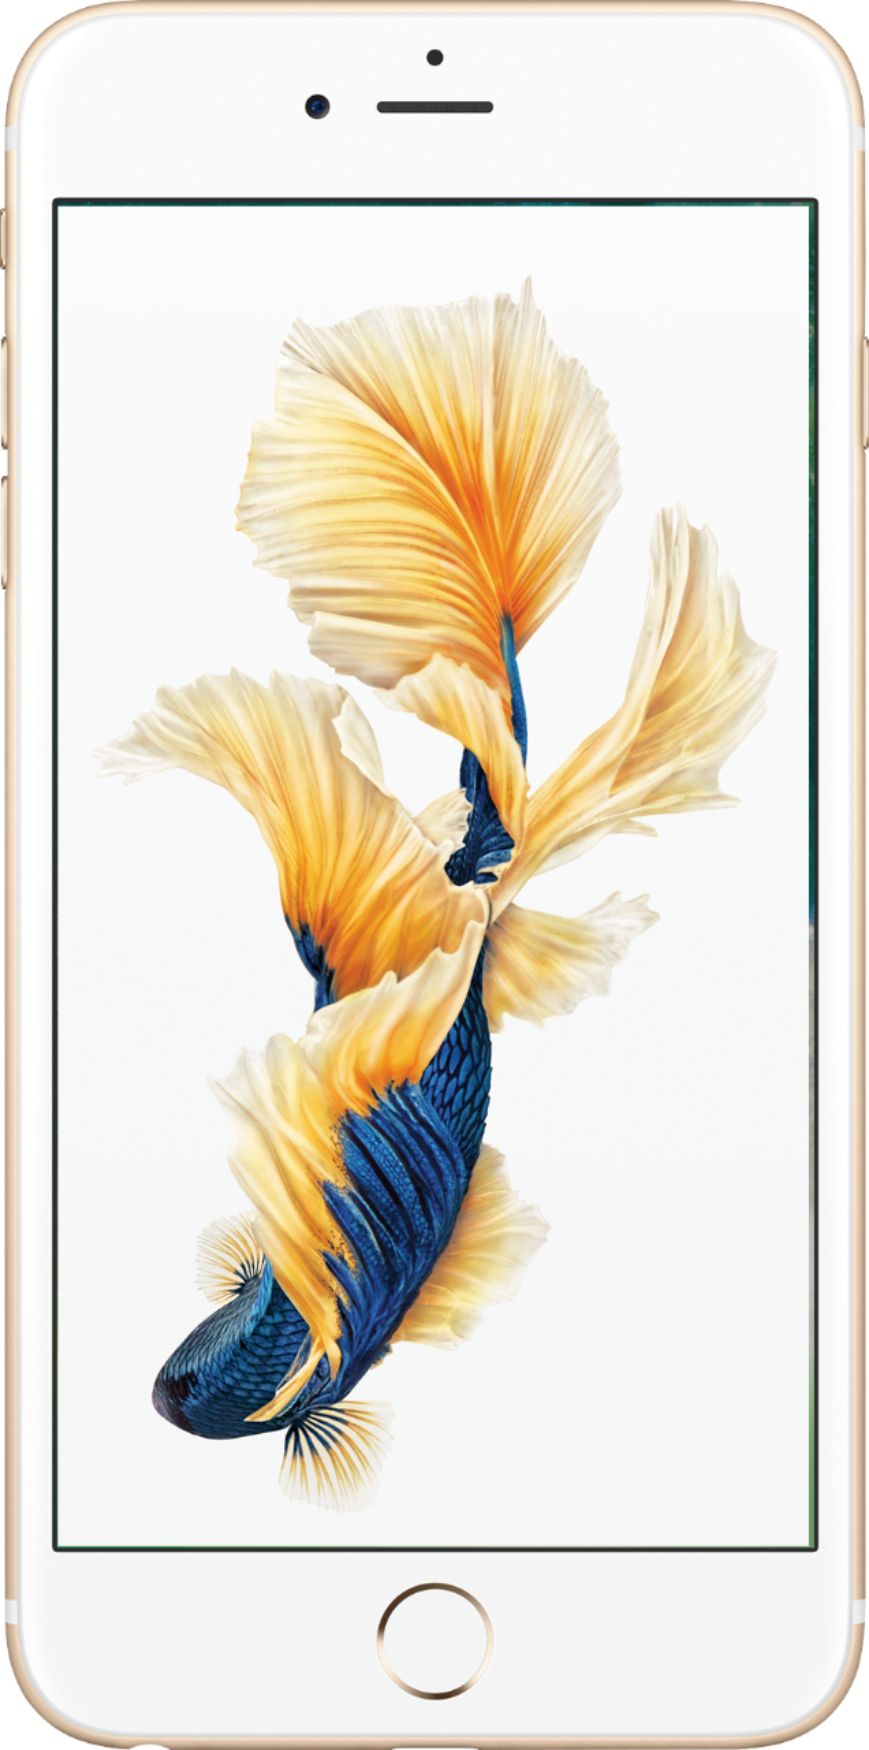 Buy: Apple iPhone 6s Plus 32GB Gold (AT&T) MN362LL/A